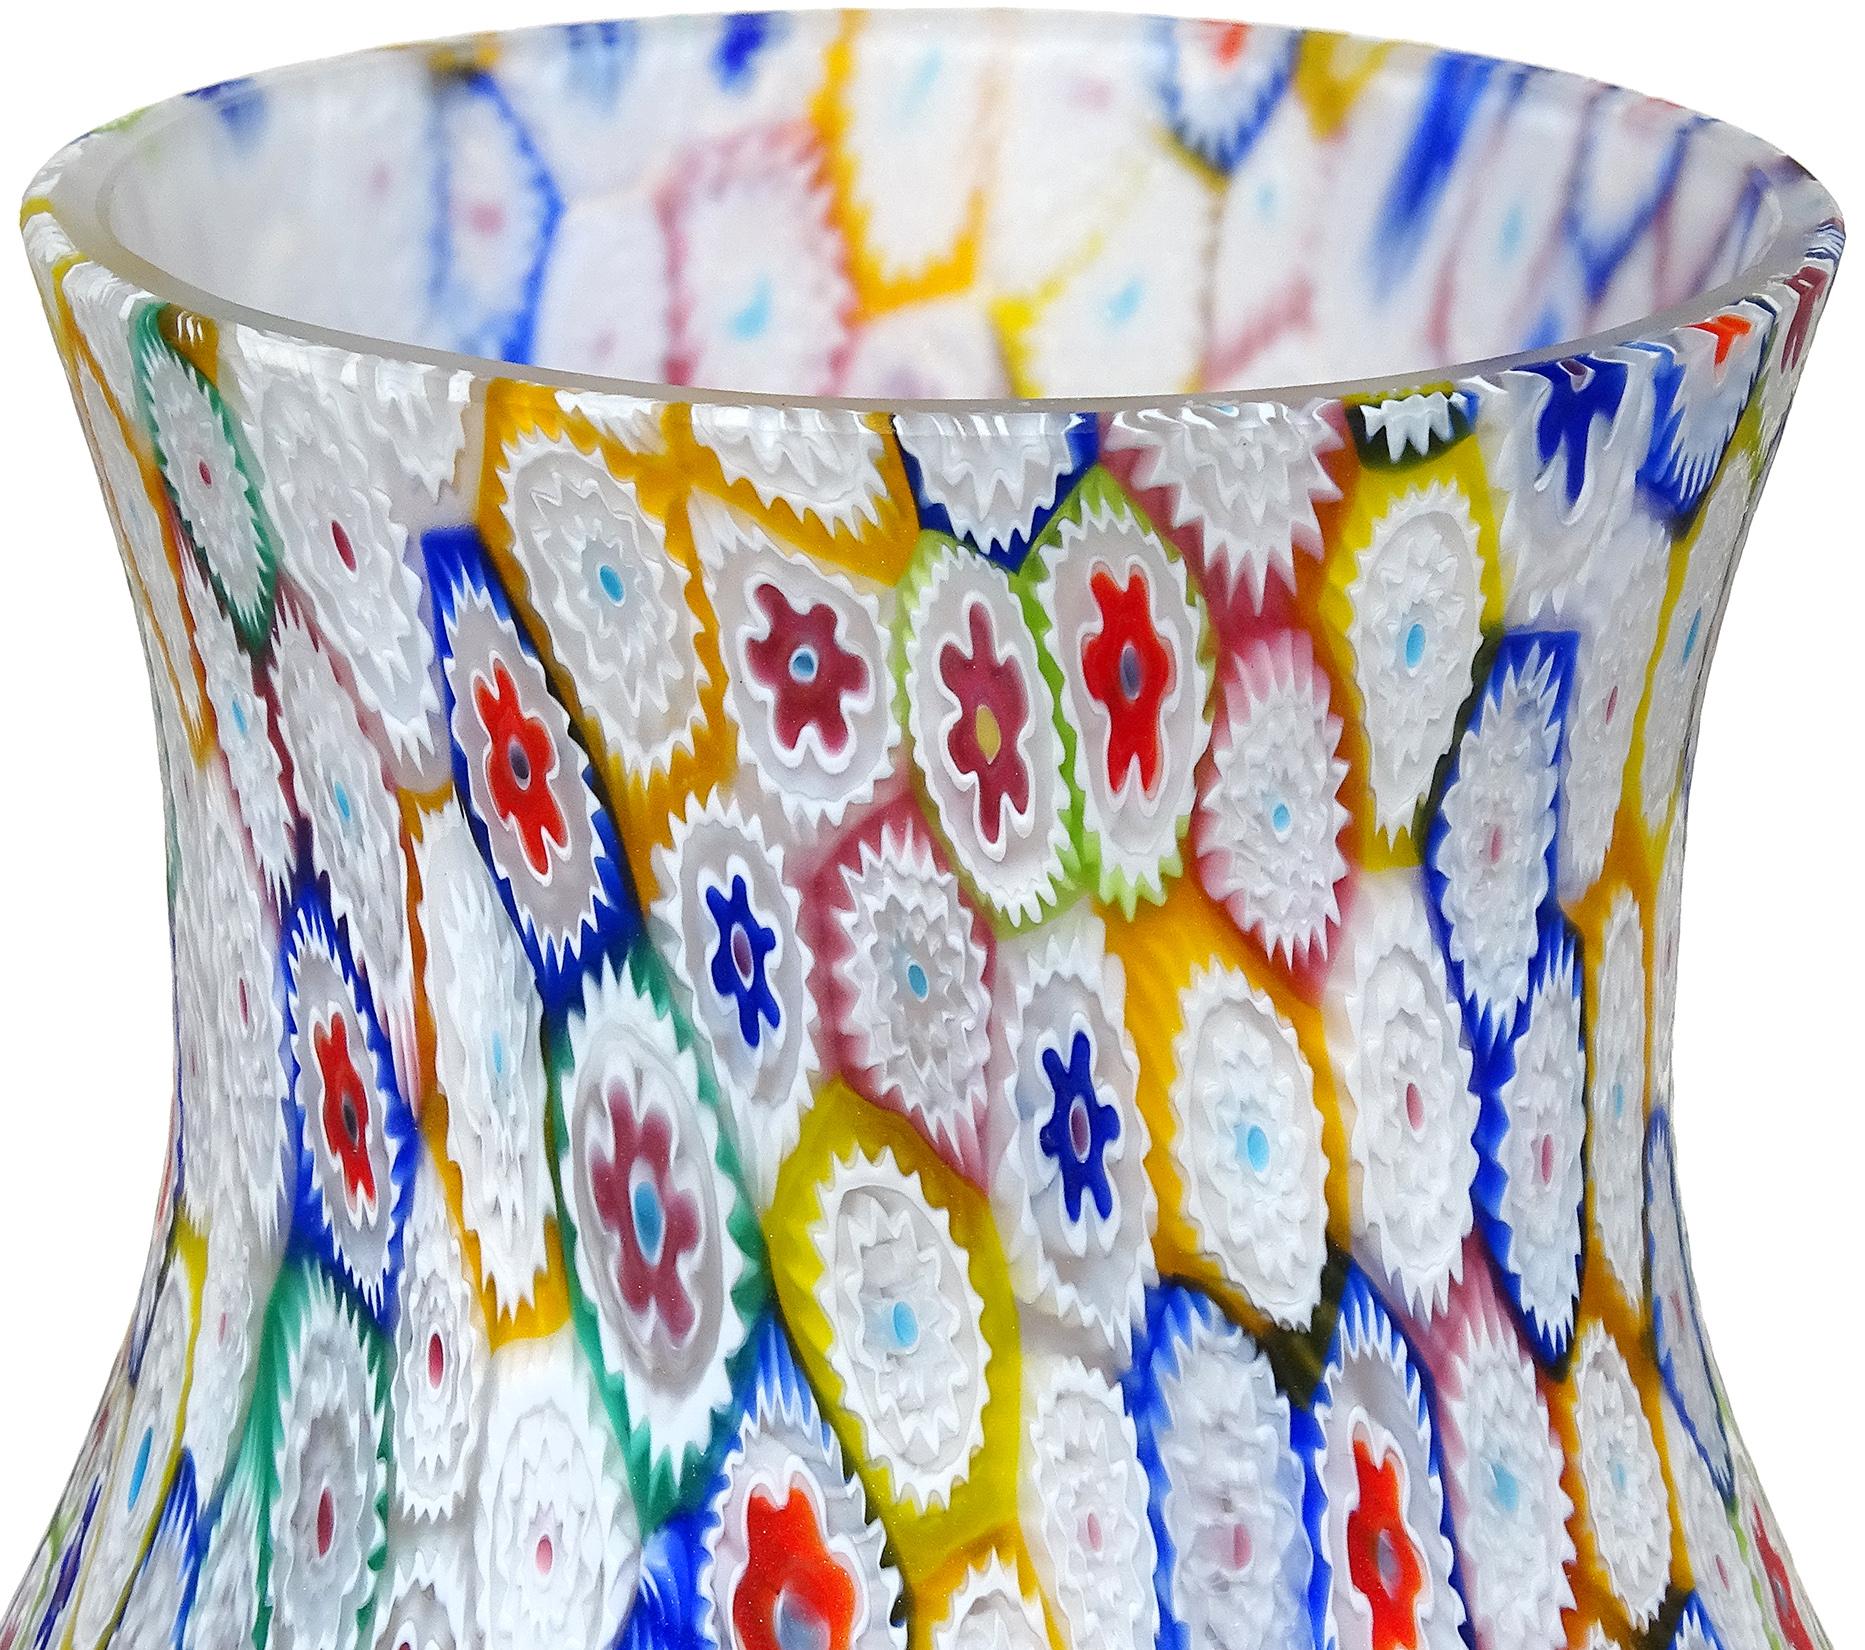 Hand-Crafted Fratelli Toso Murano Millefiori Flower Mosaic Italian Art Glass Footed Vase